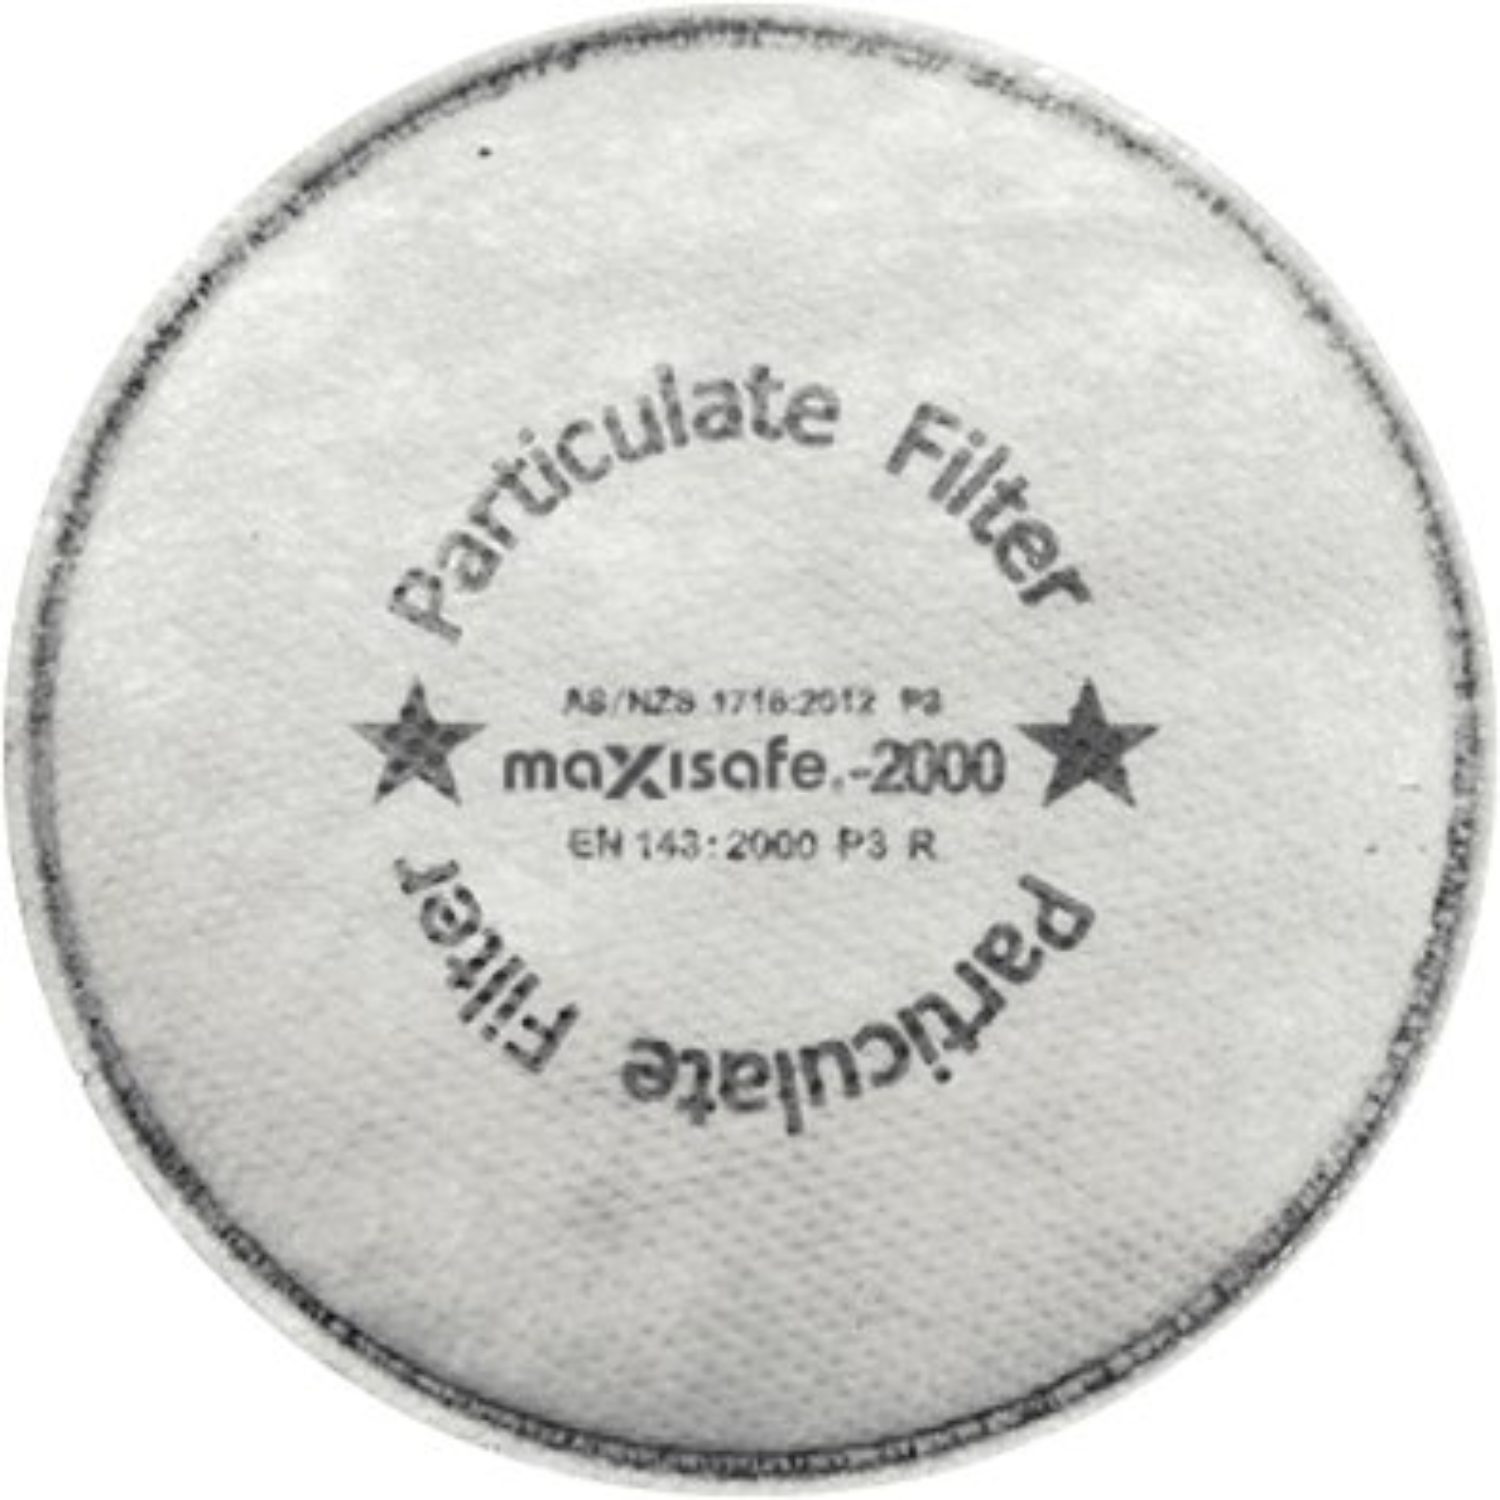 P3 Carbon Particulate Filter